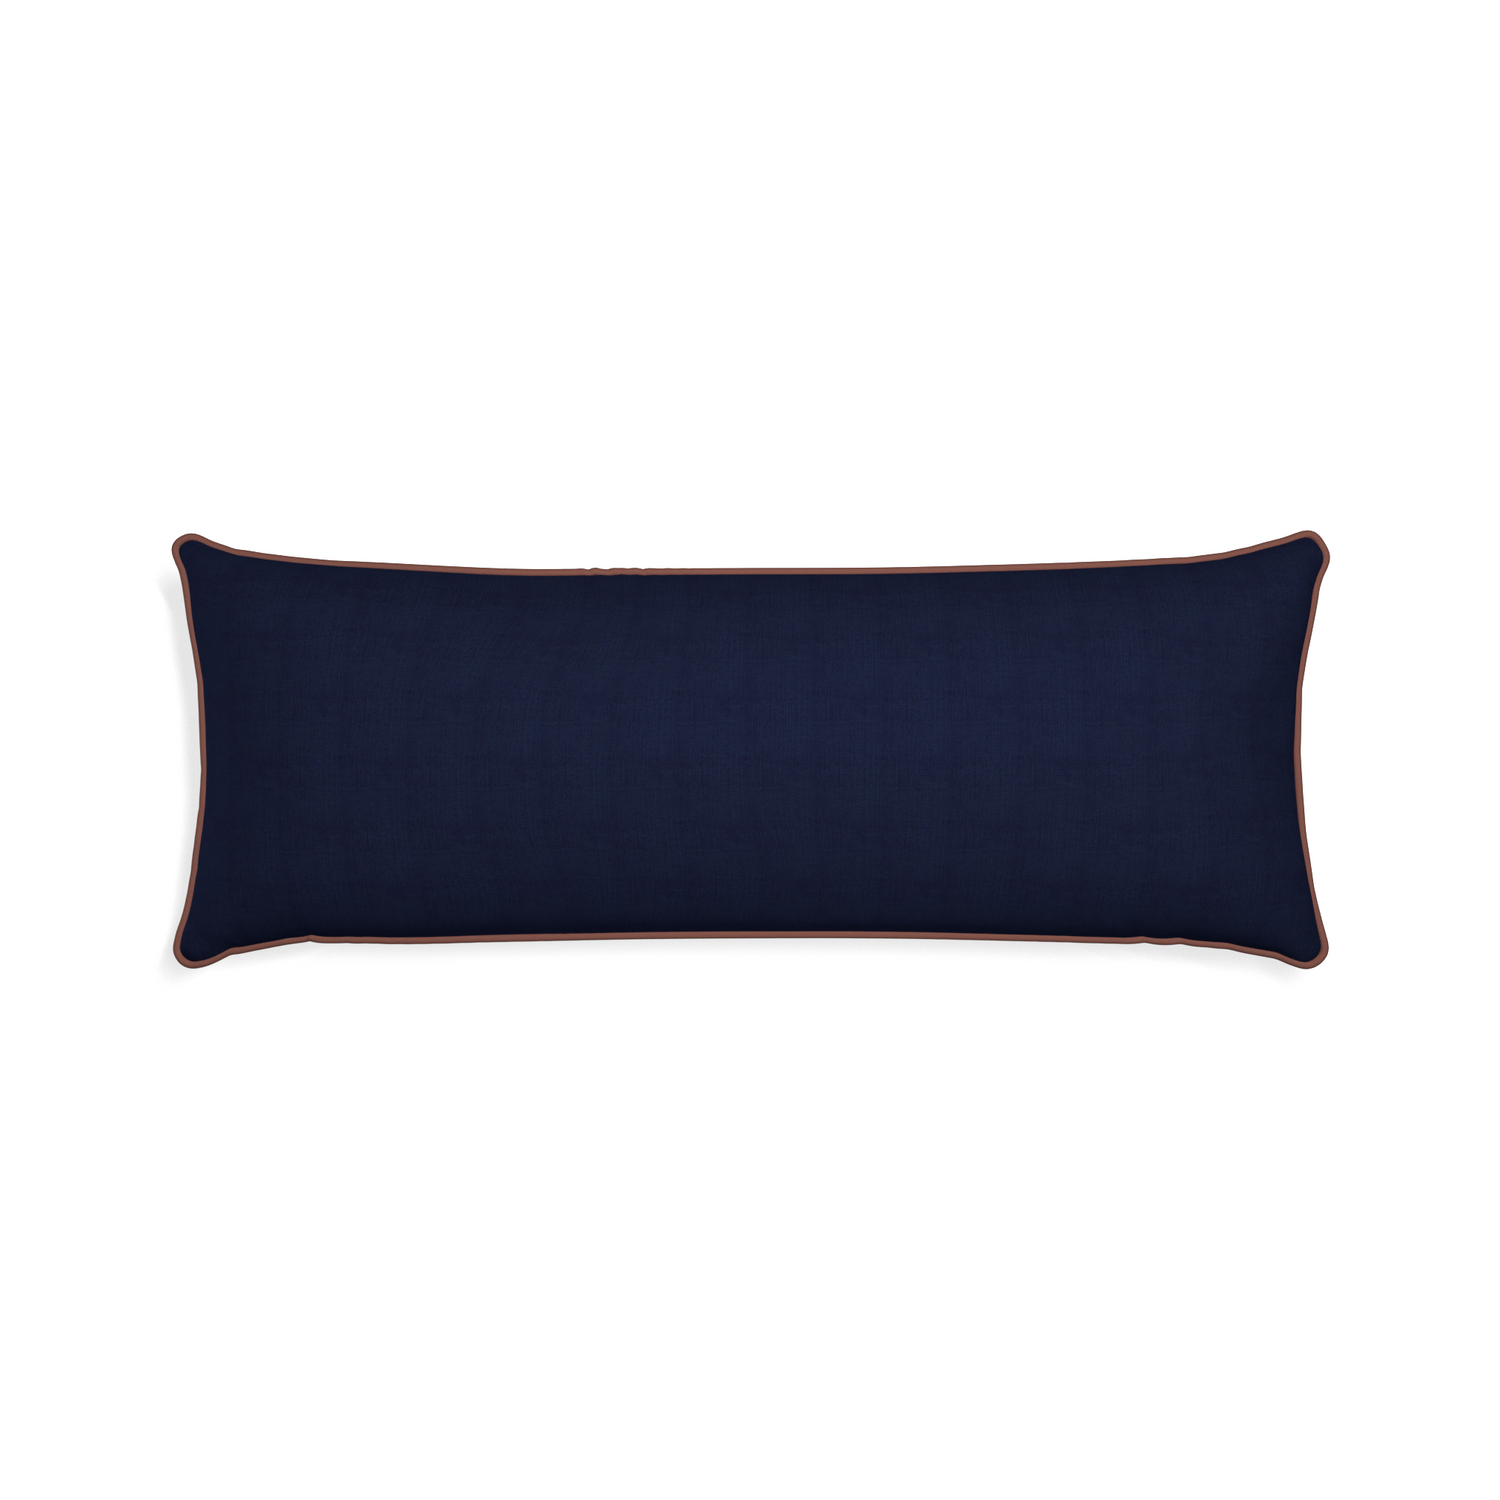 Xl-lumbar midnight custom pillow with w piping on white background